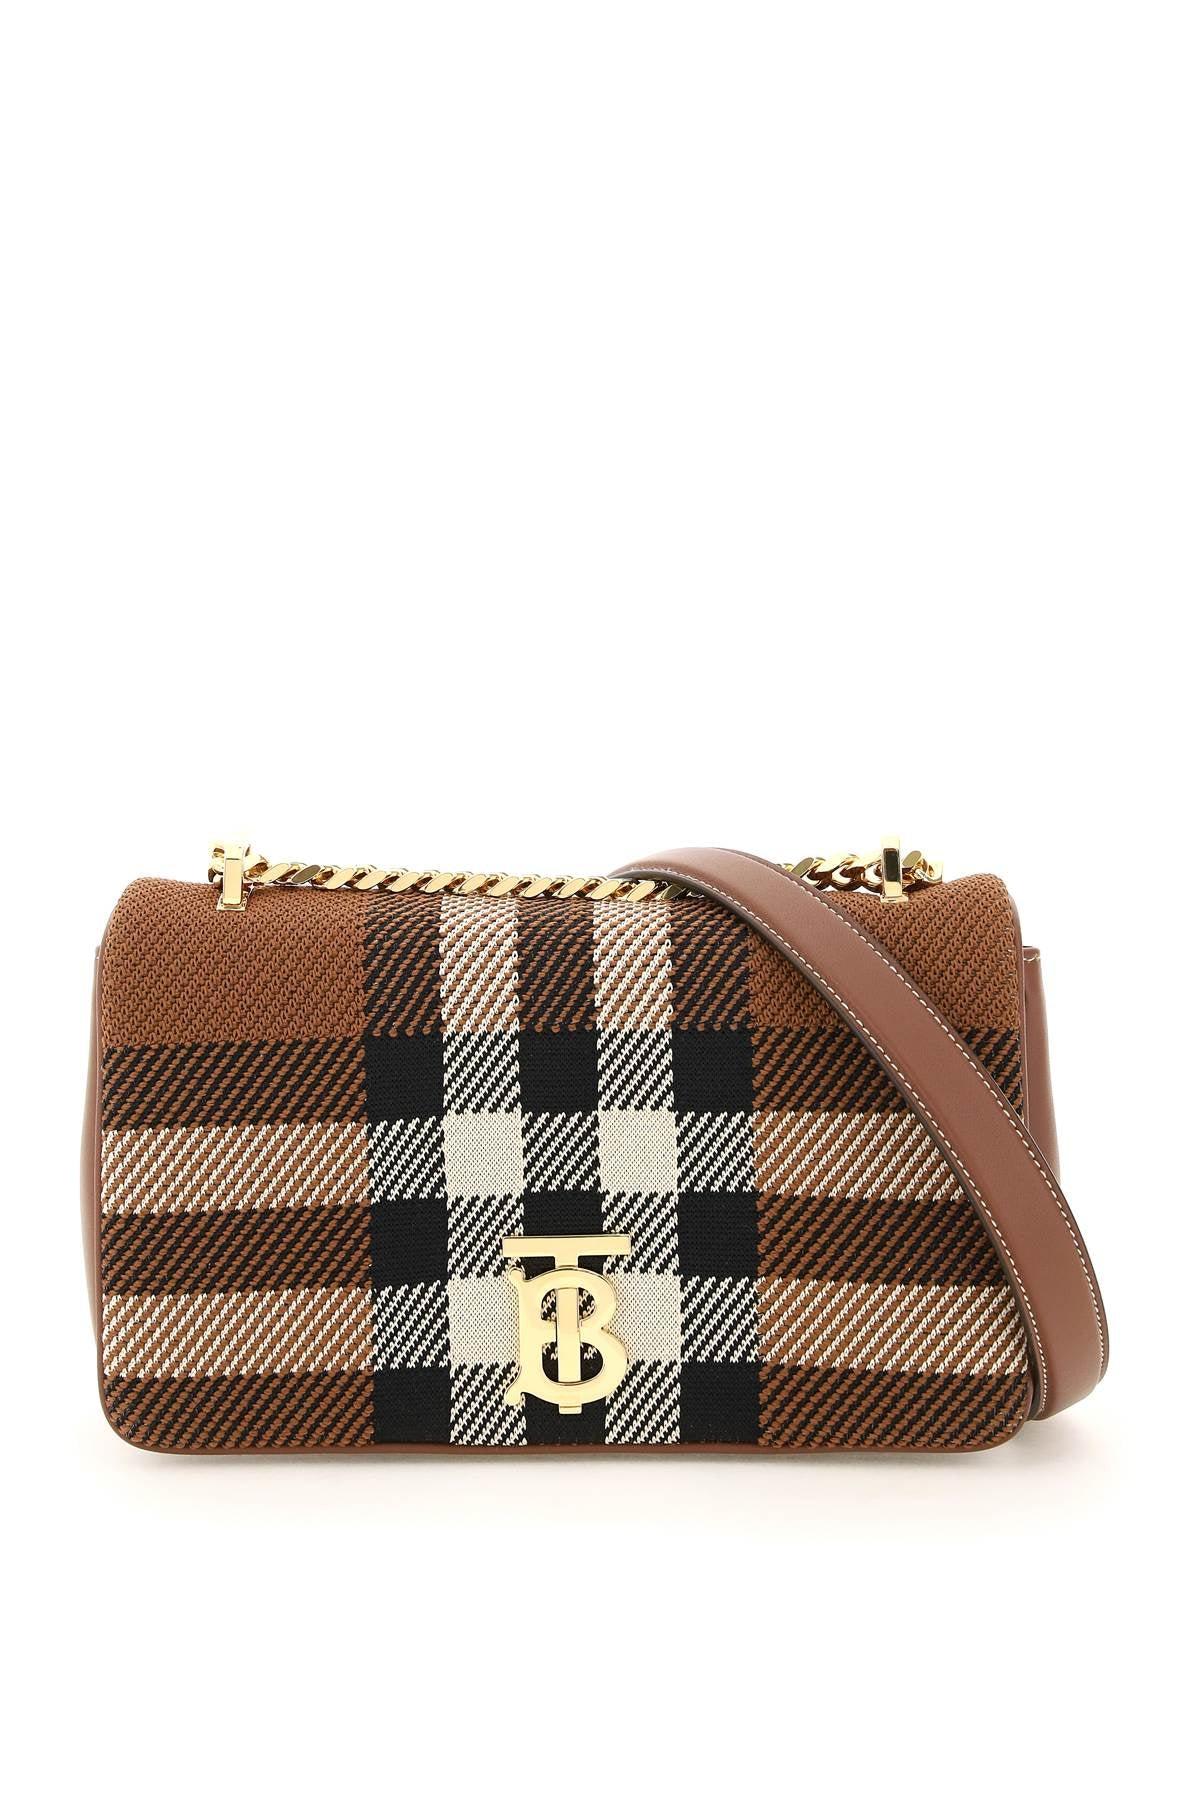 Burberry Small Knitted Check Lola Bag